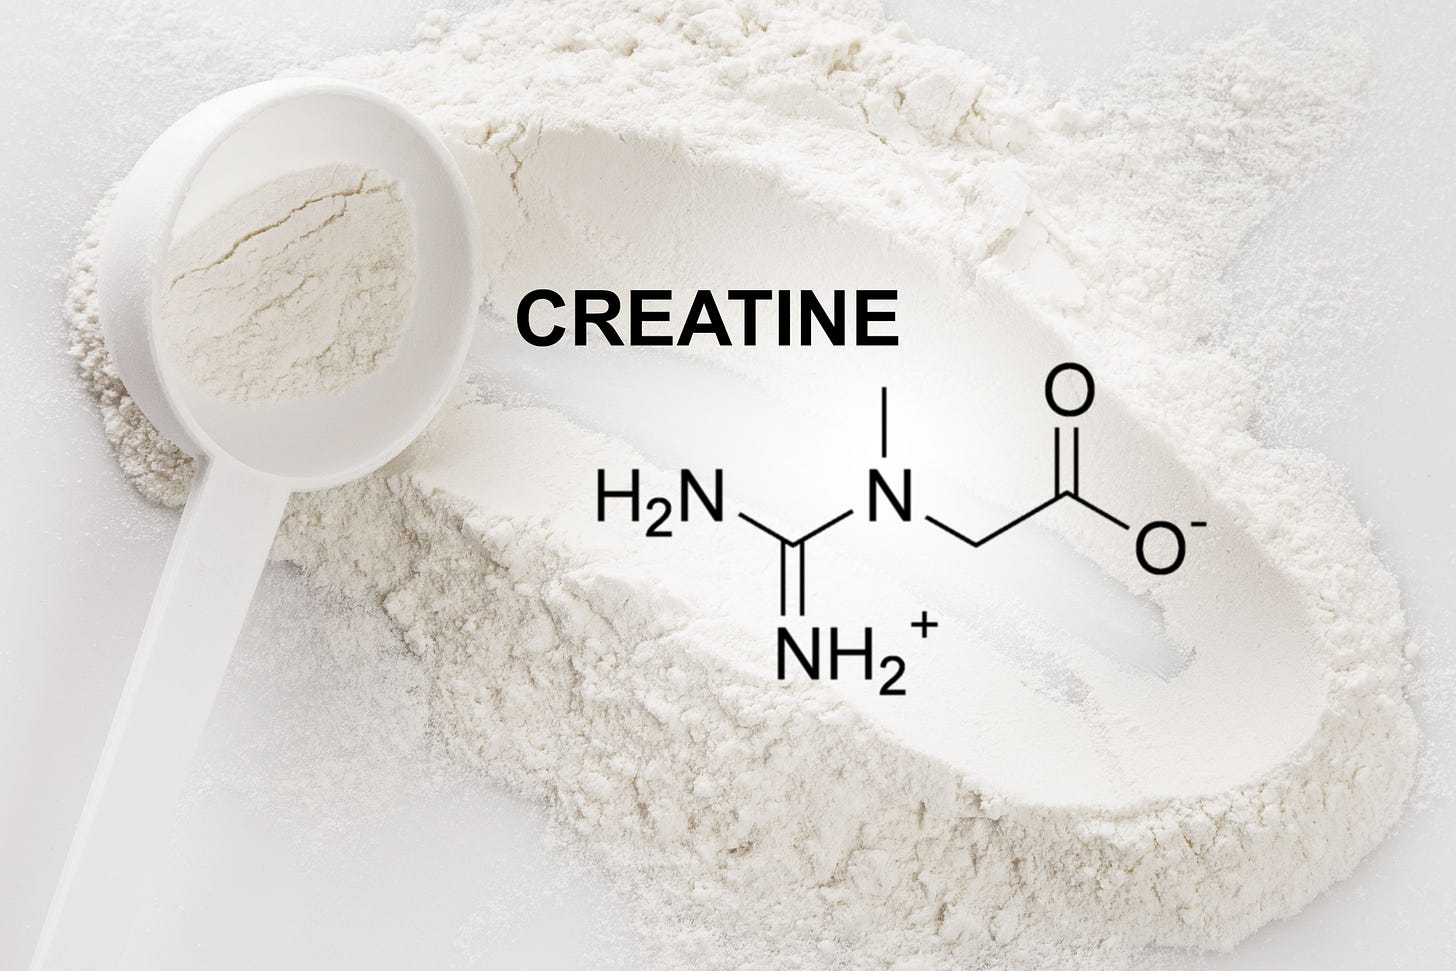 Creatine: What it is and what are the benefits and side effects